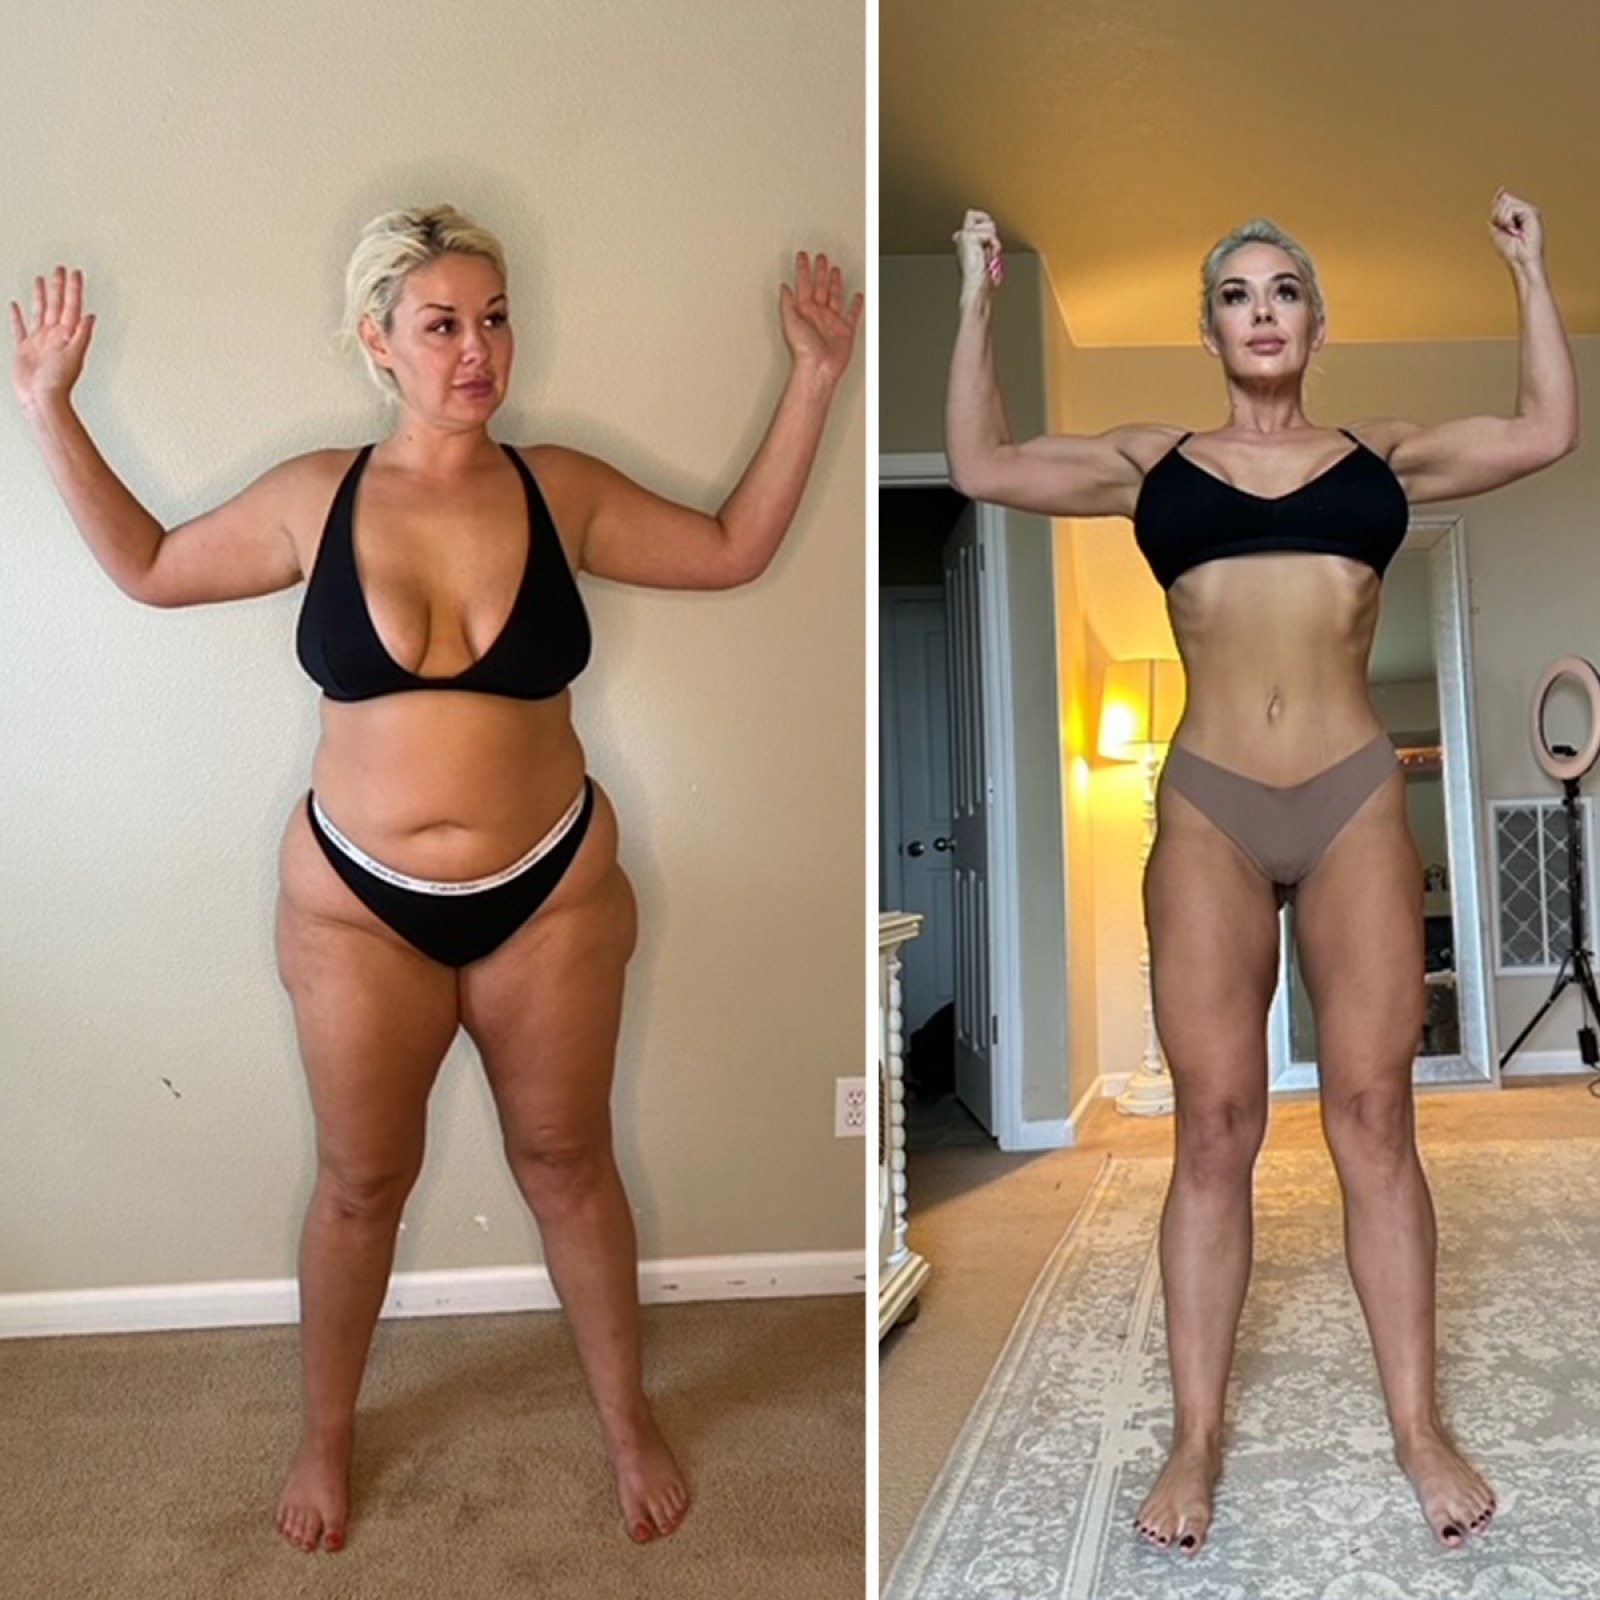 Woman Reveals How She Lost 80lbs In 8 Months While Eating Favorite Foods